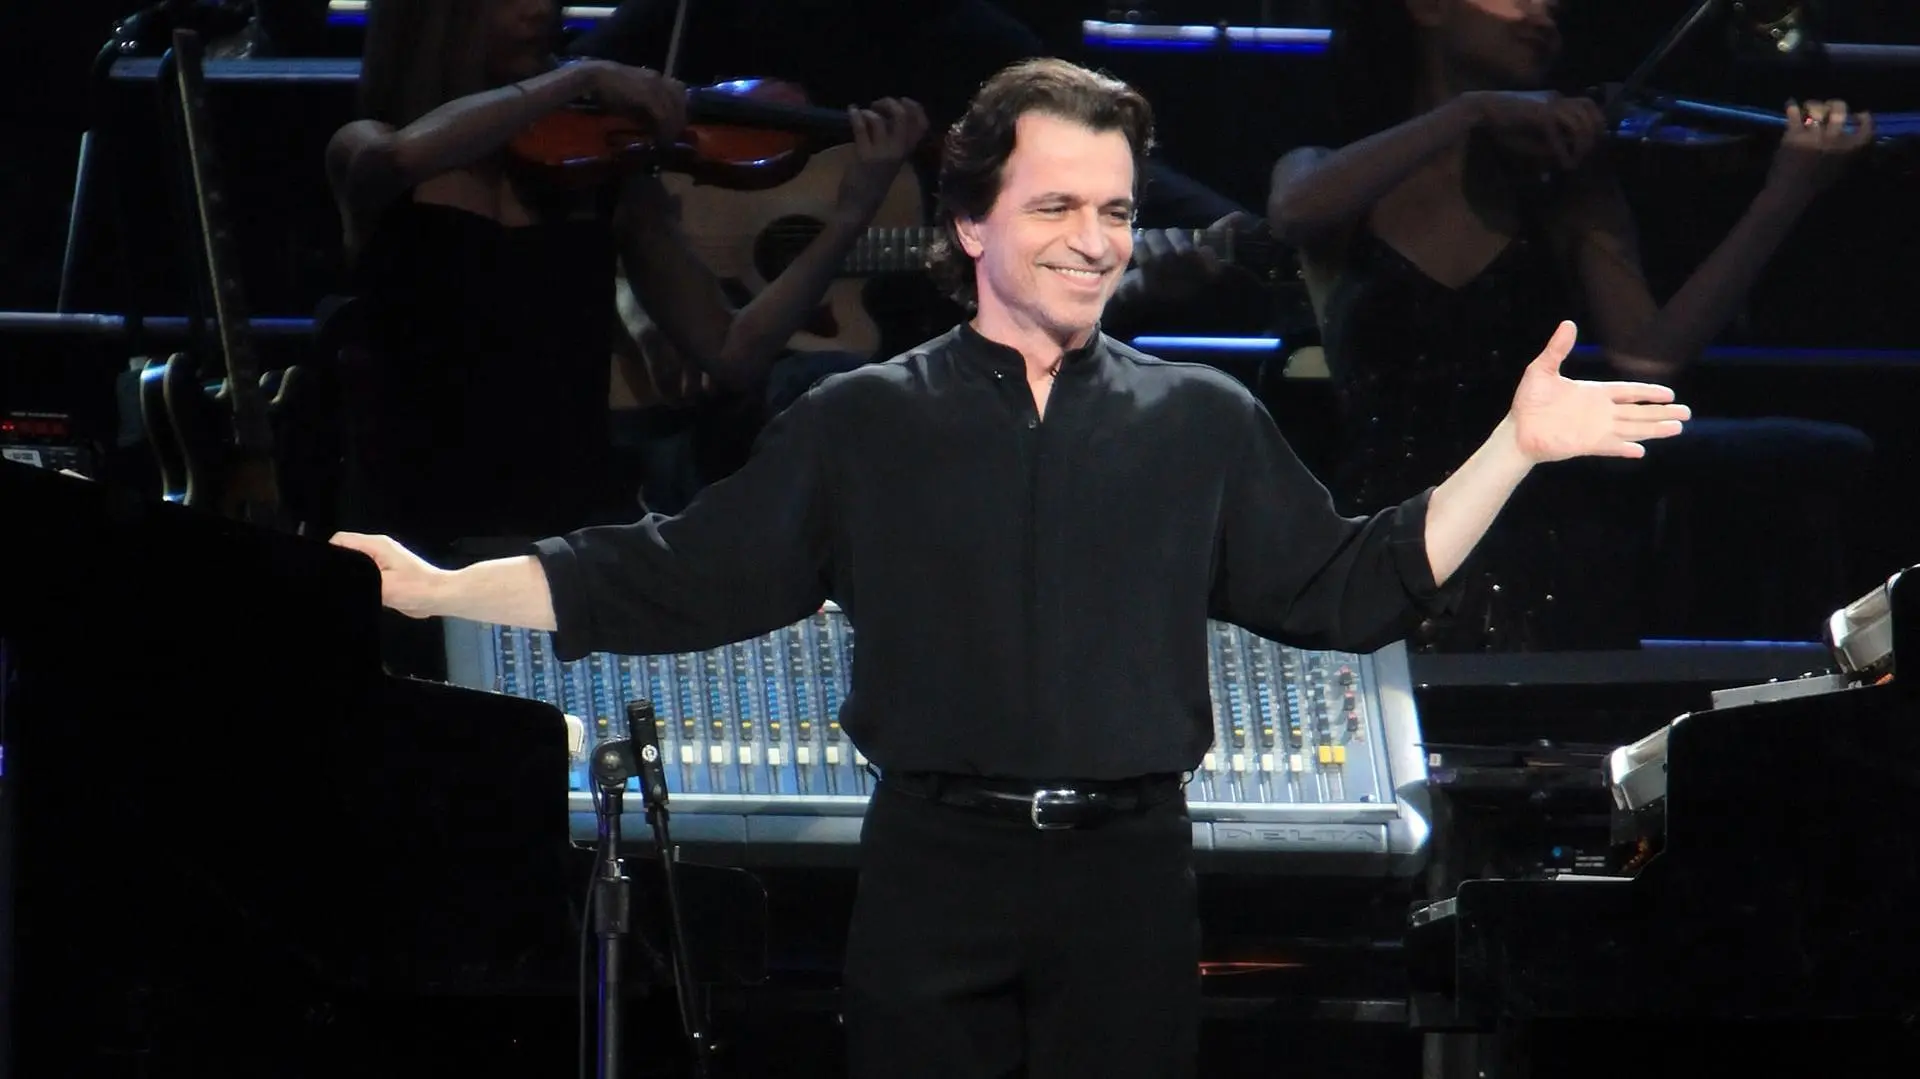 Yanni: Voices - Live from the Forum in Acapulco_peliplat